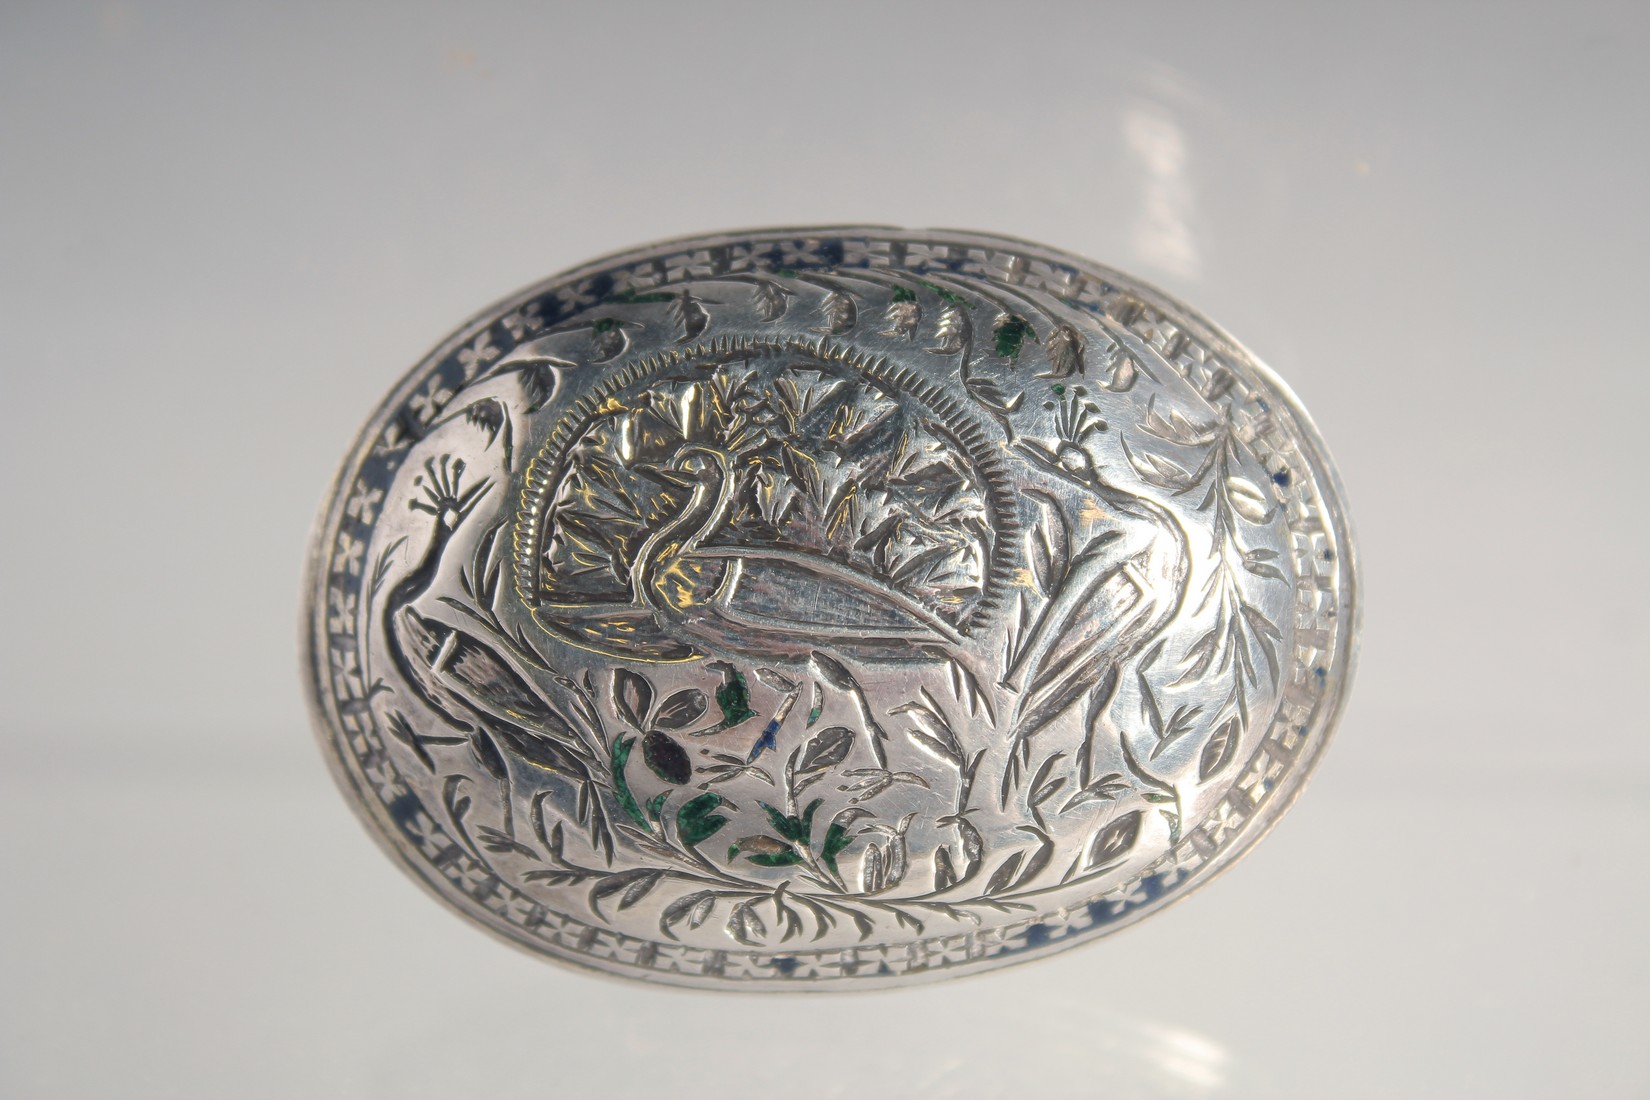 TWO 18TH/19TH CENTURY MUGHAL INDIAN LUCKNOW ENAMELLED SILVER SNUFF BOXES, 6cm wide and 3.5cm, (2). - Image 2 of 6